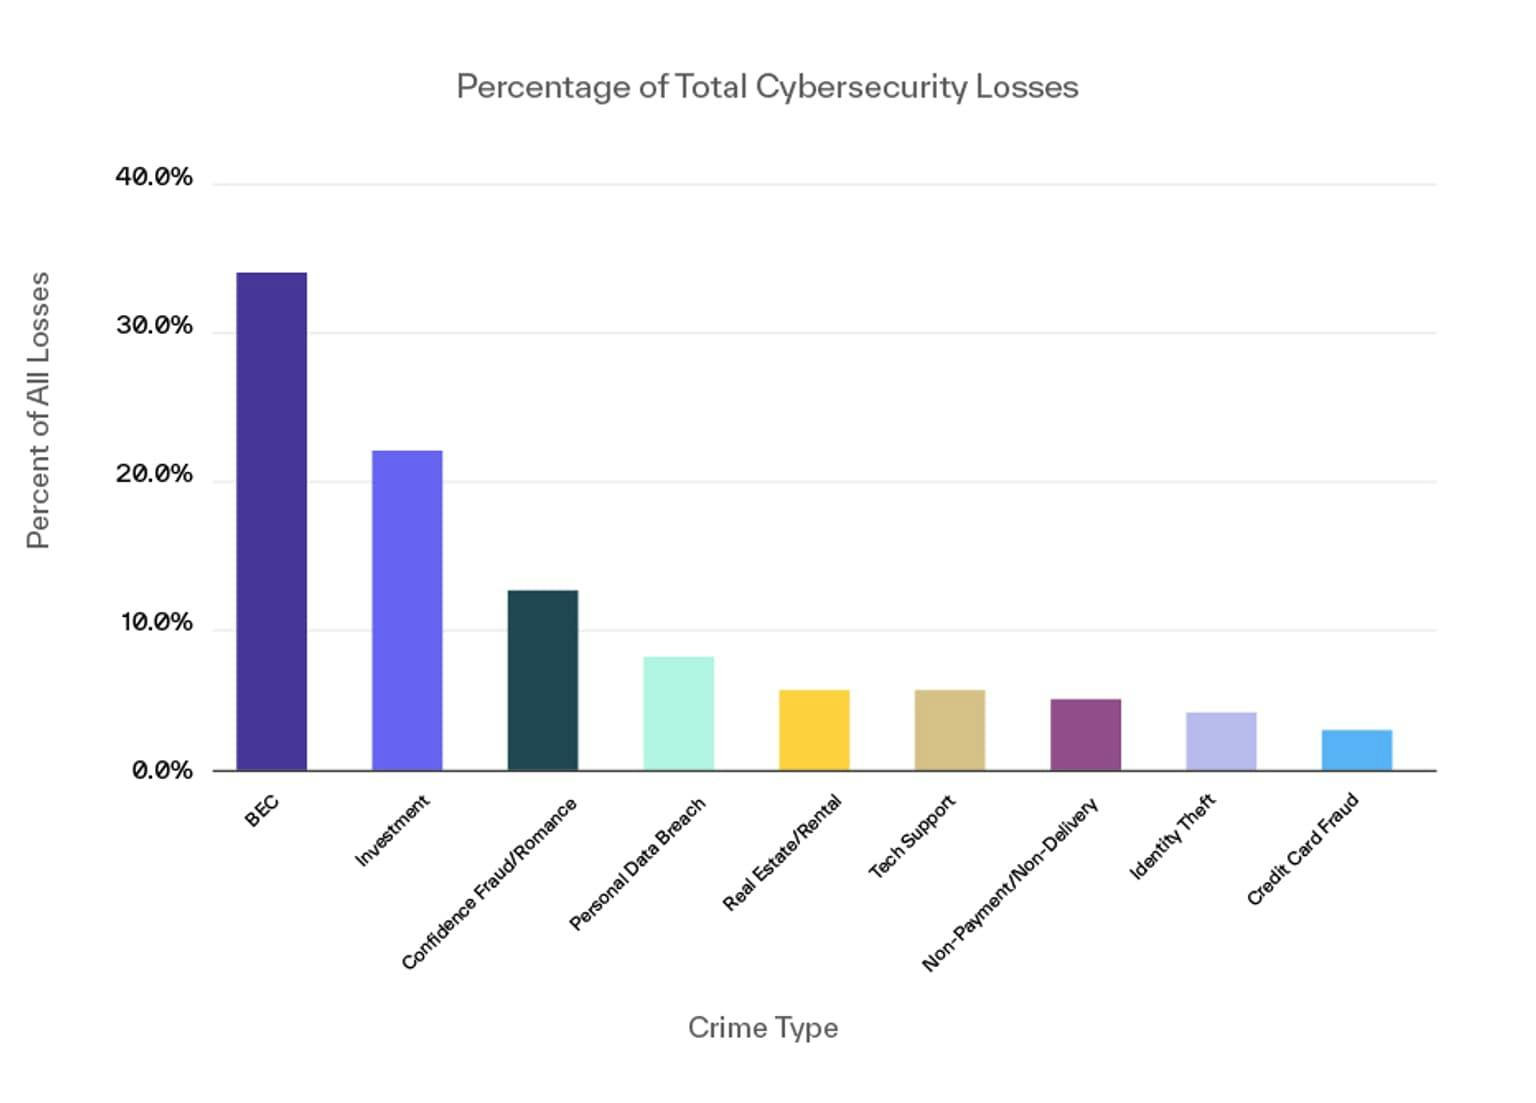 Percentage of cybersecurity losses by attack type